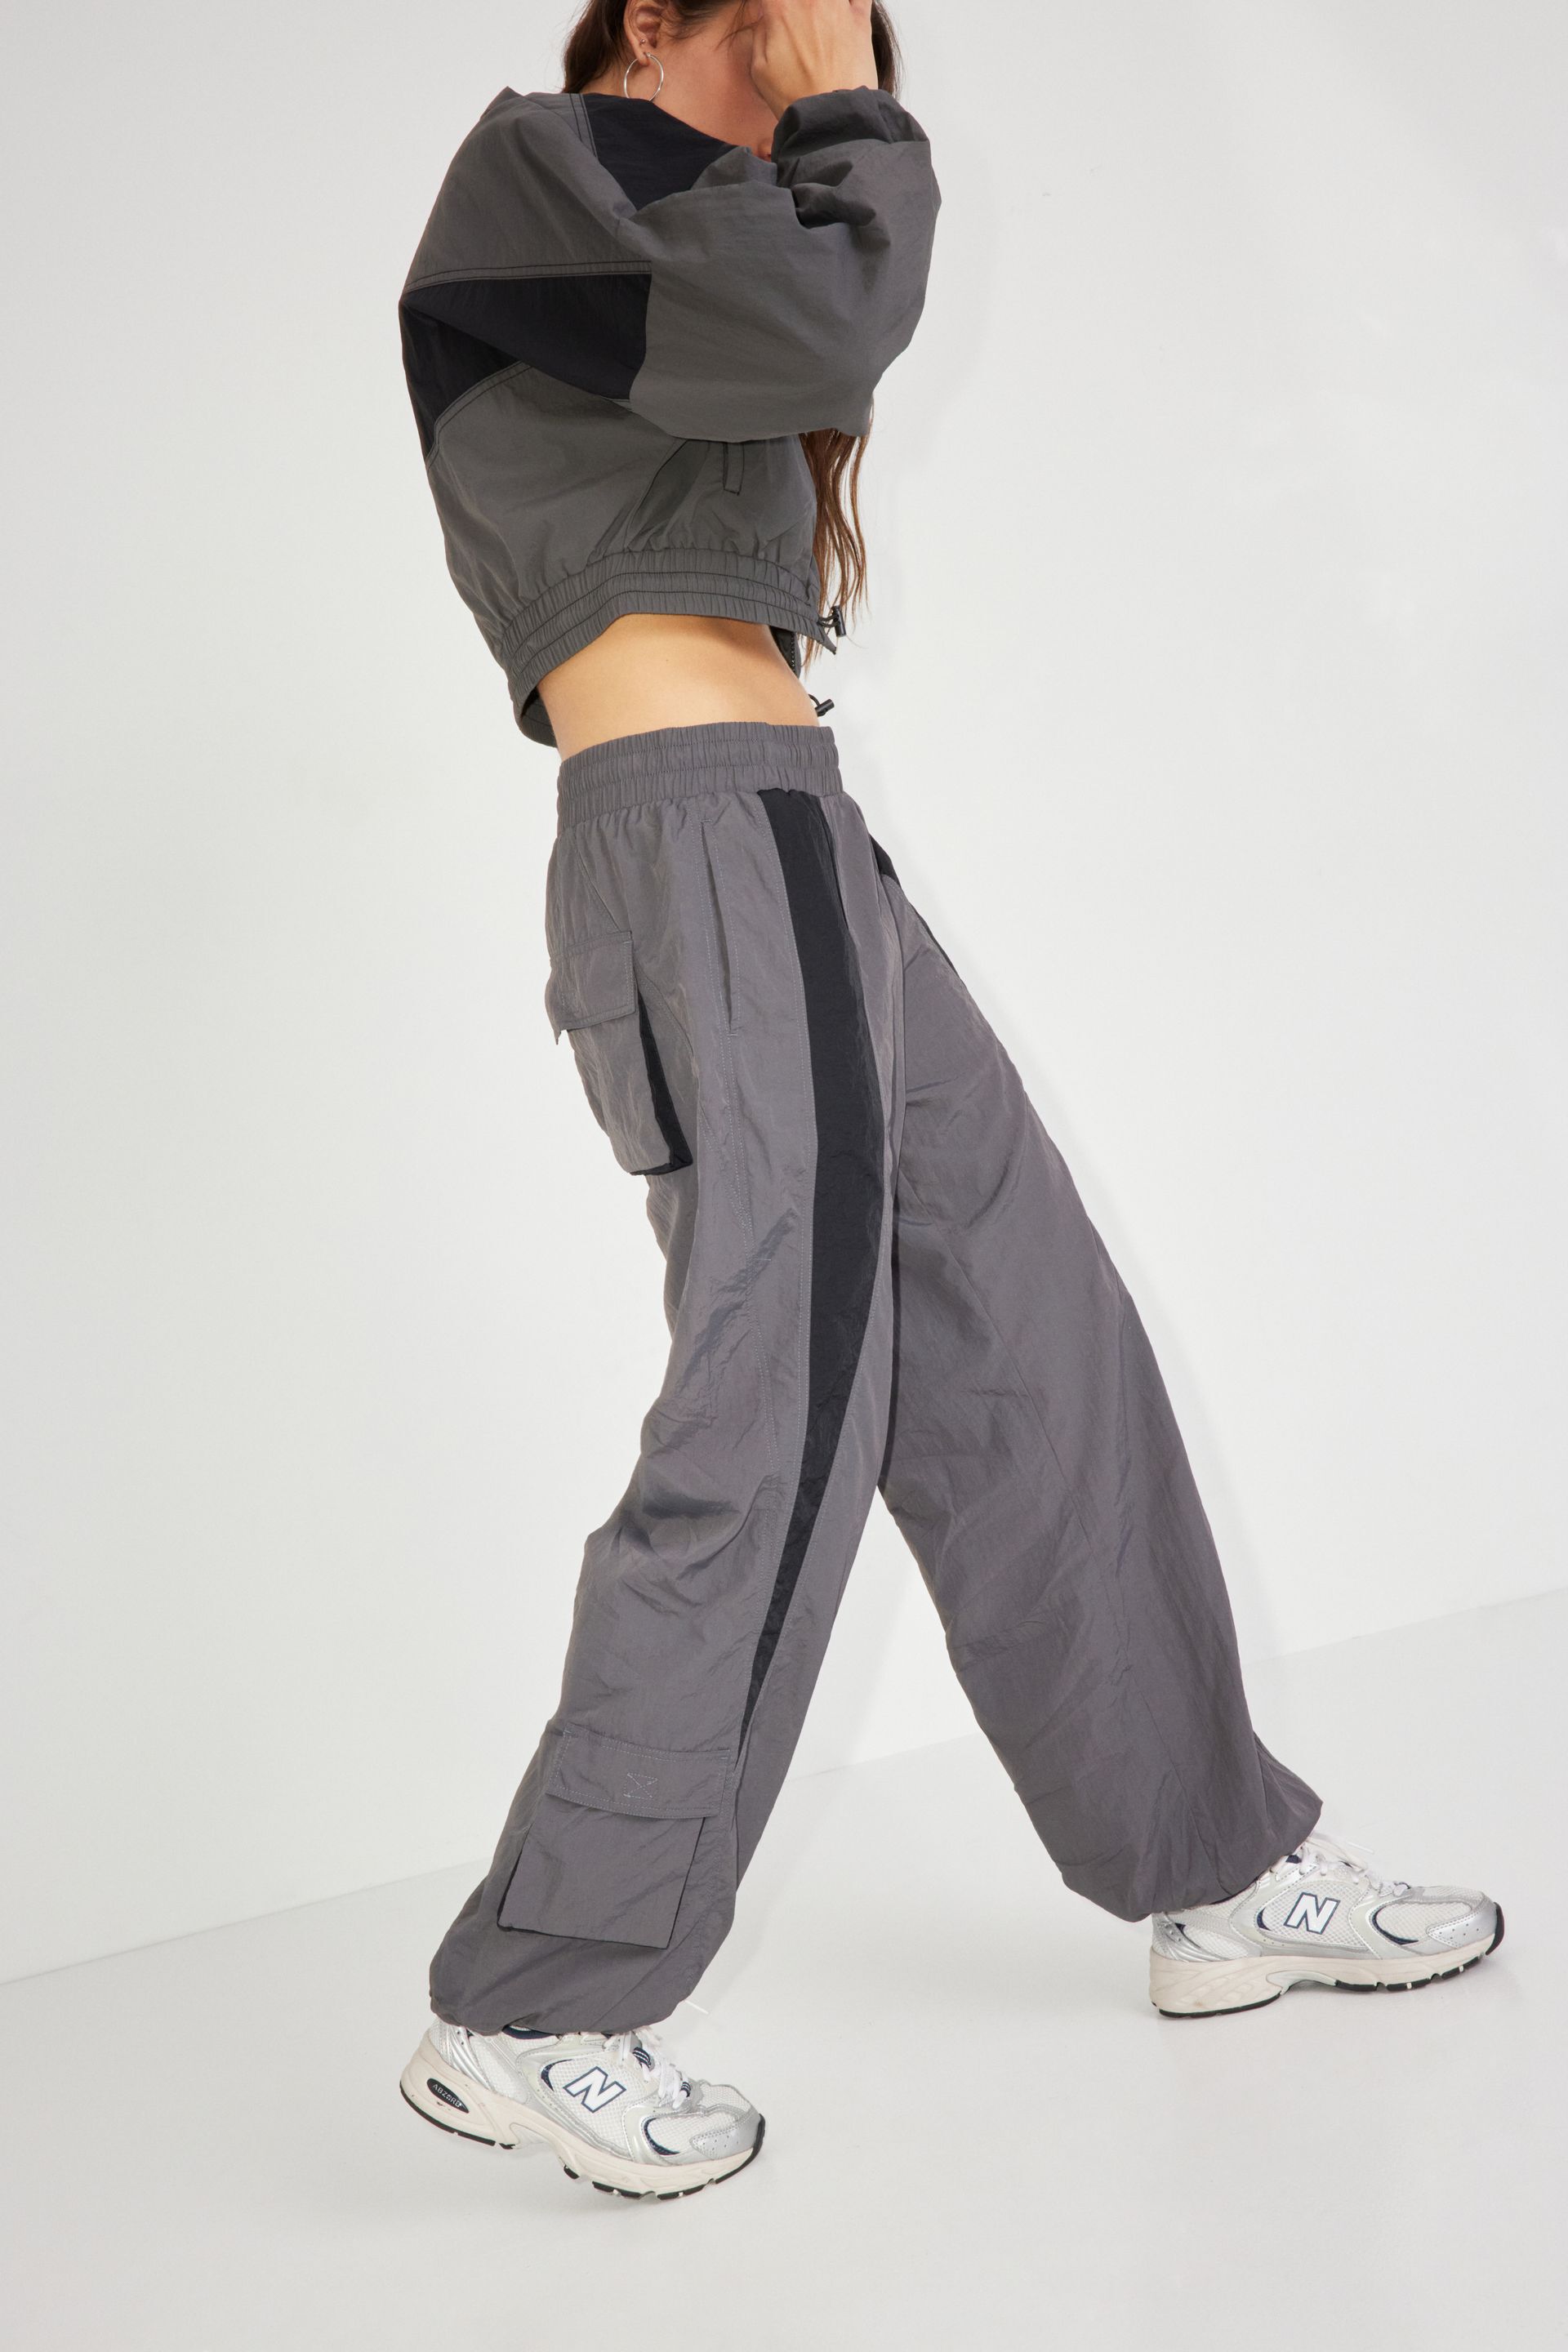 Loose Cut, High Rise Pants for Women Custom Made Cotton Pleated